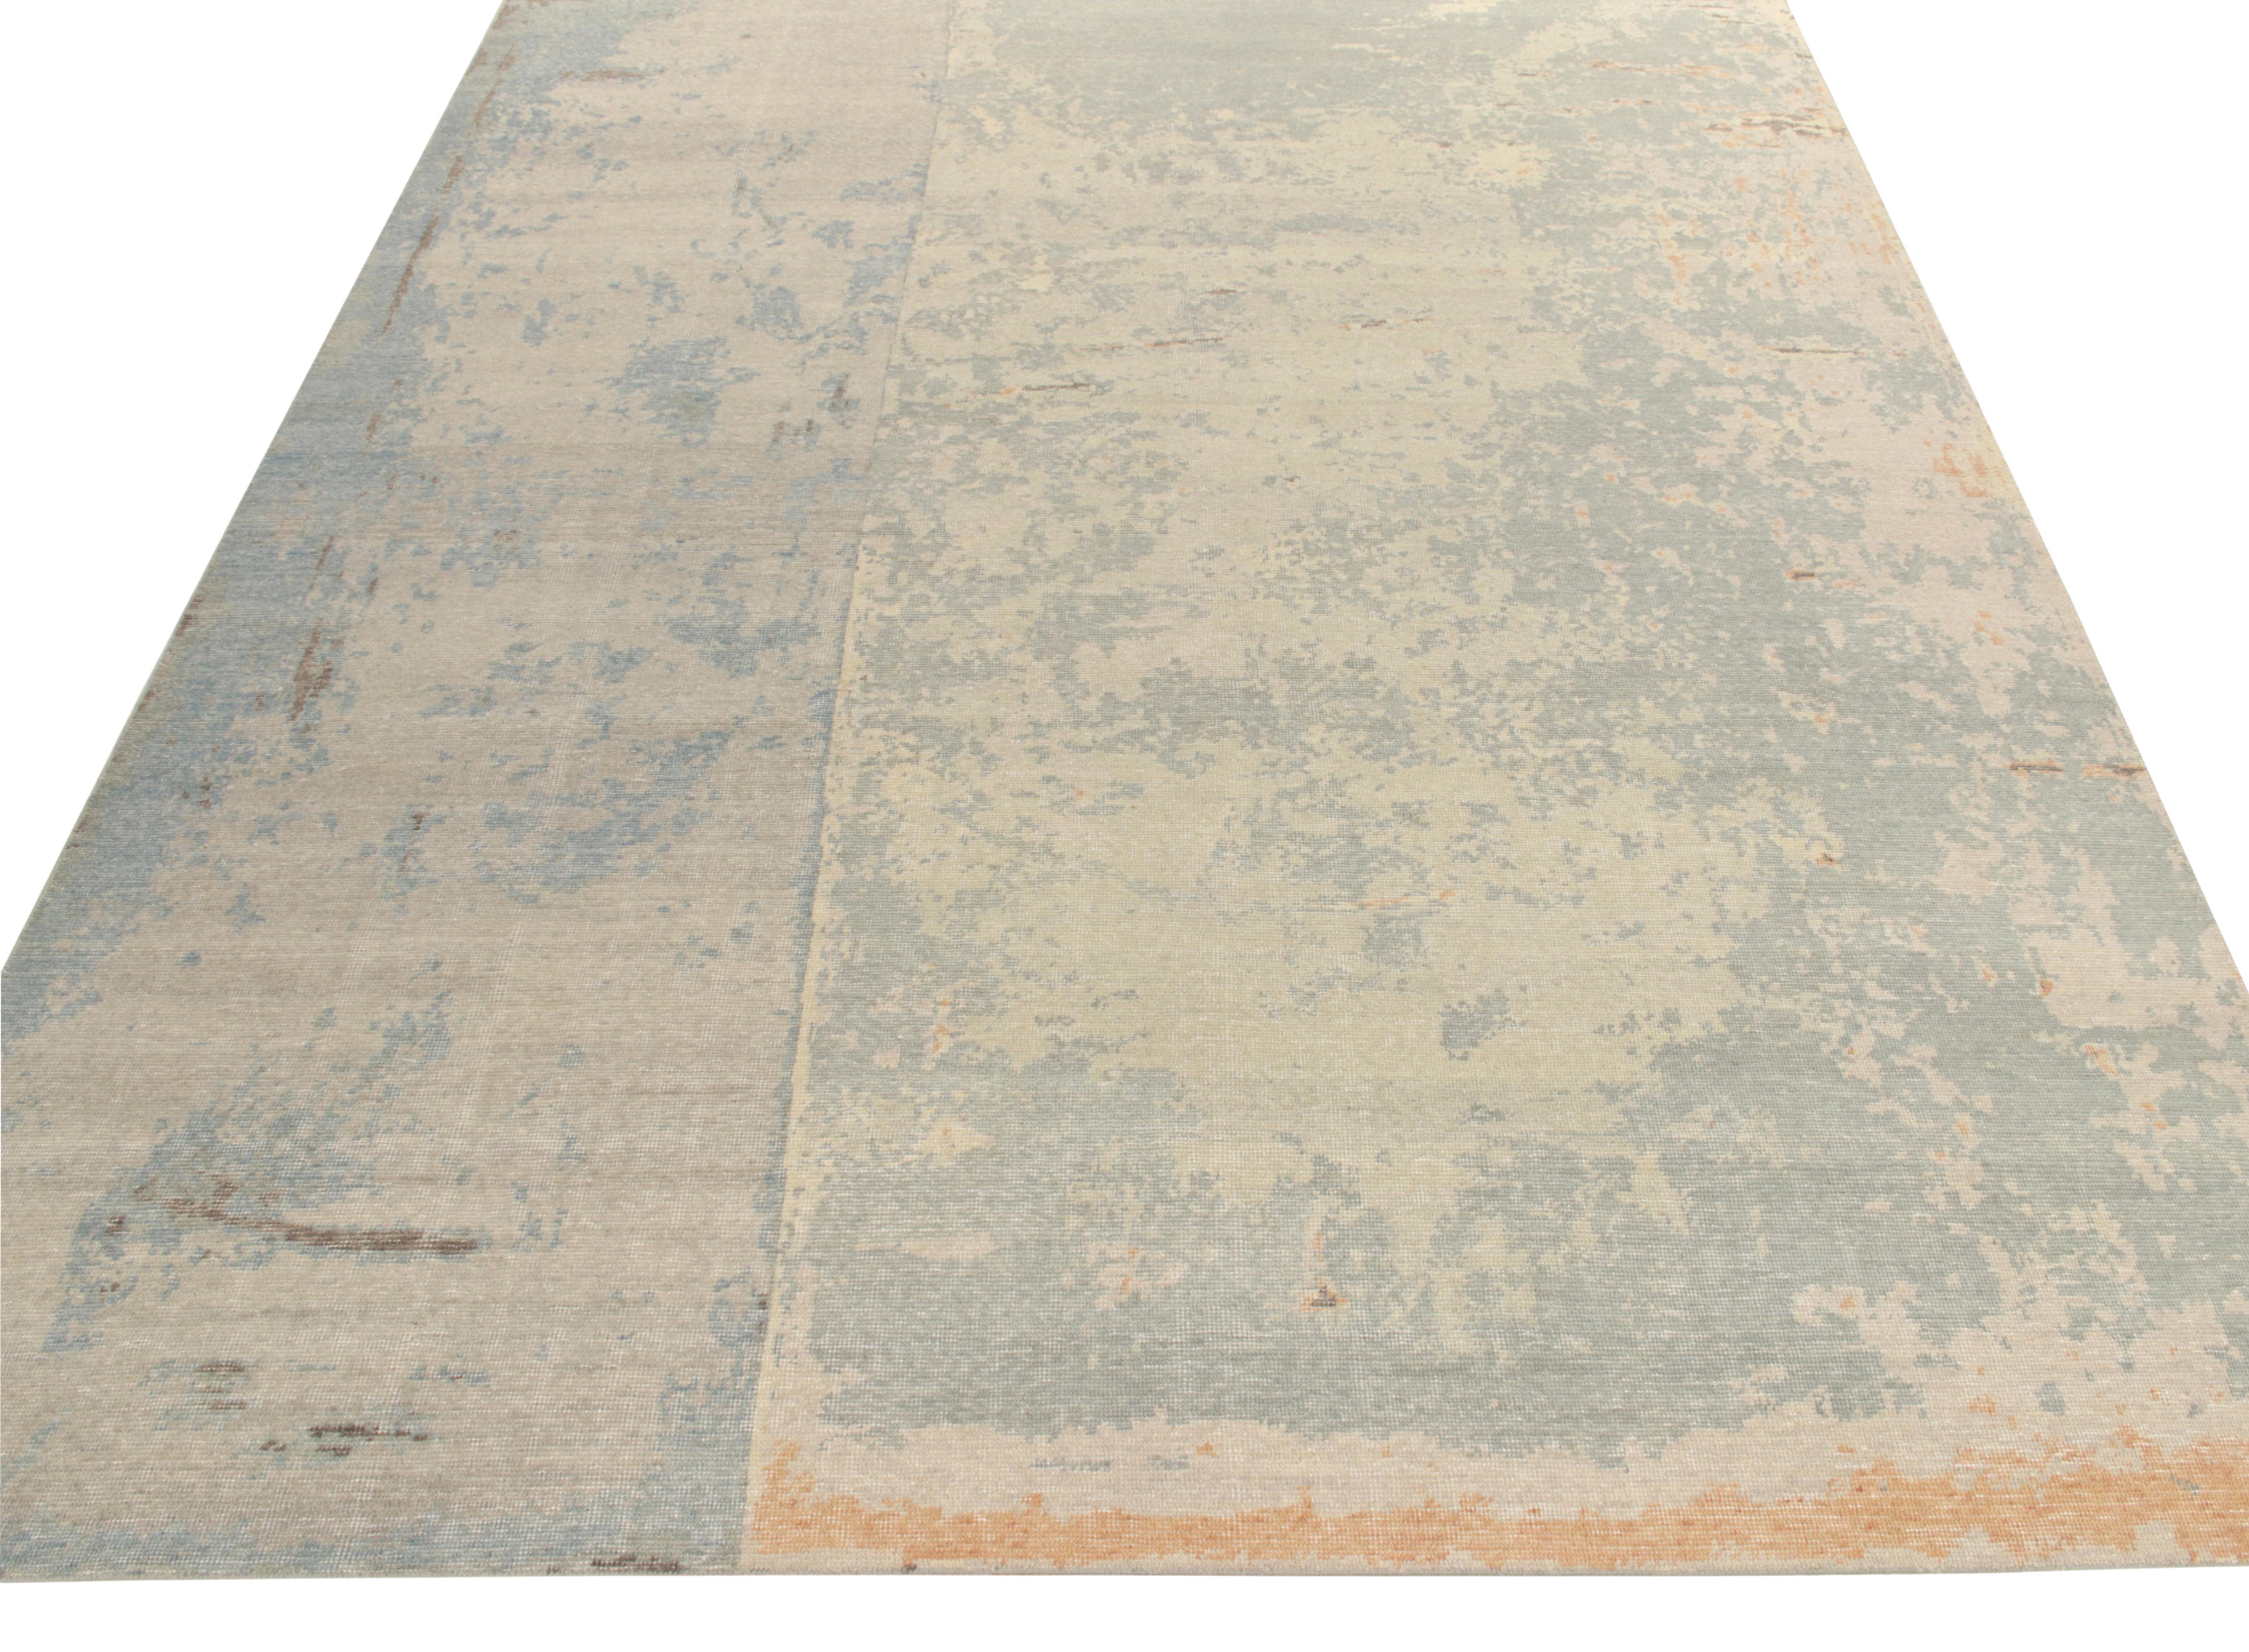 Hand-knotted in wool, a 9x12 contemporary piece from Rug & Kilim’s Homage Collection featuring an abstract pattern in an abrashed sky blue & light grey backdrop—creamy beige & industrial grey tones prevailing on the borders. Carrying an enticing